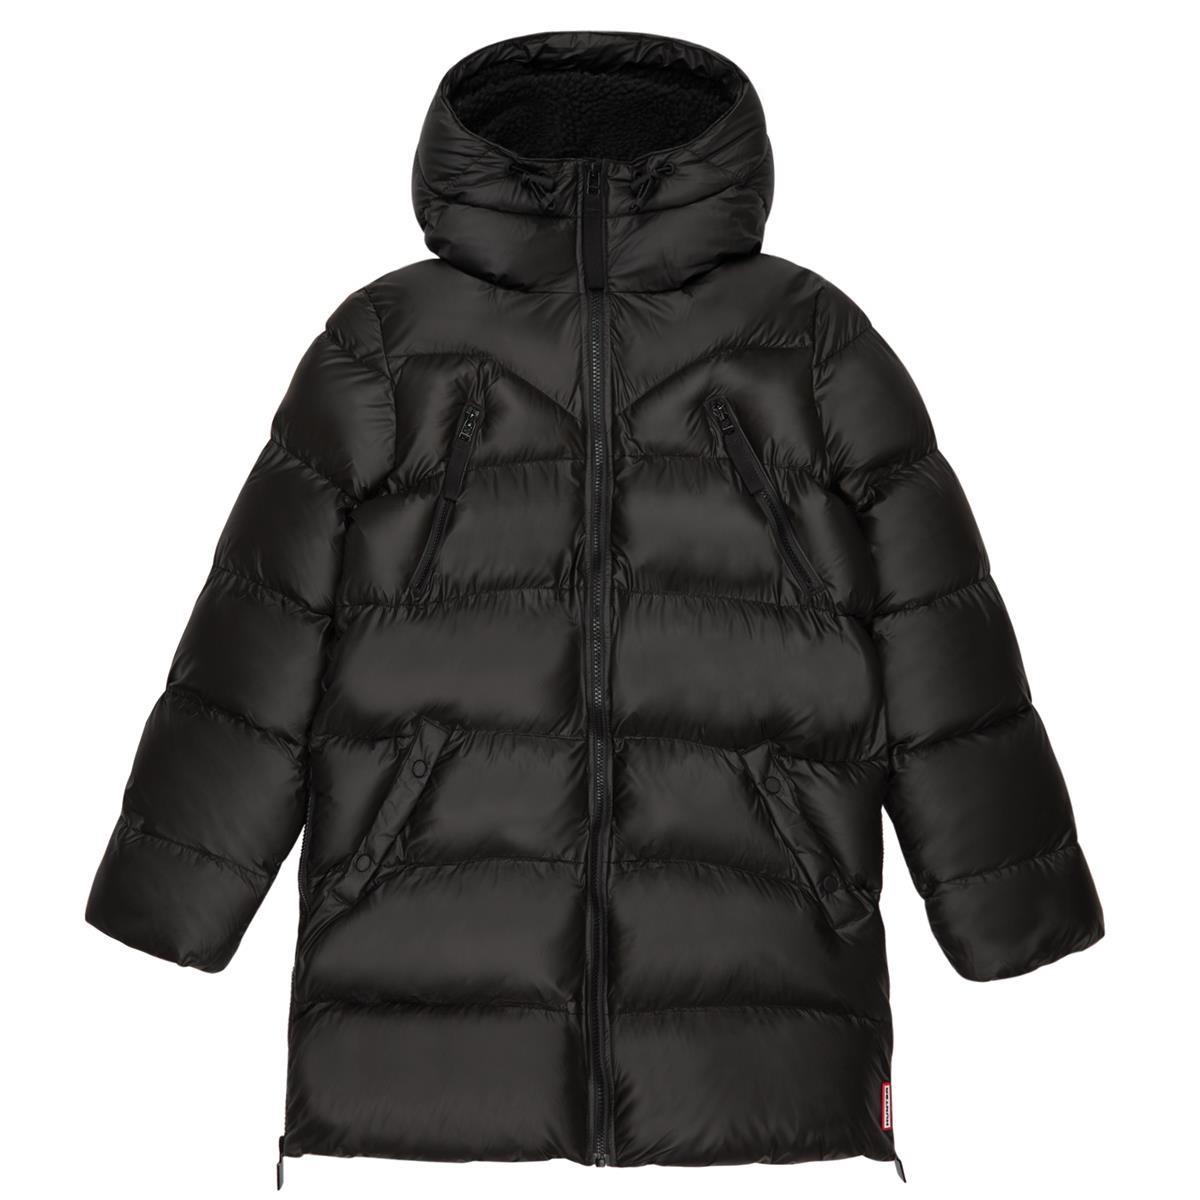 What extra ventilation does the Hunter Puffer Jacket provide?